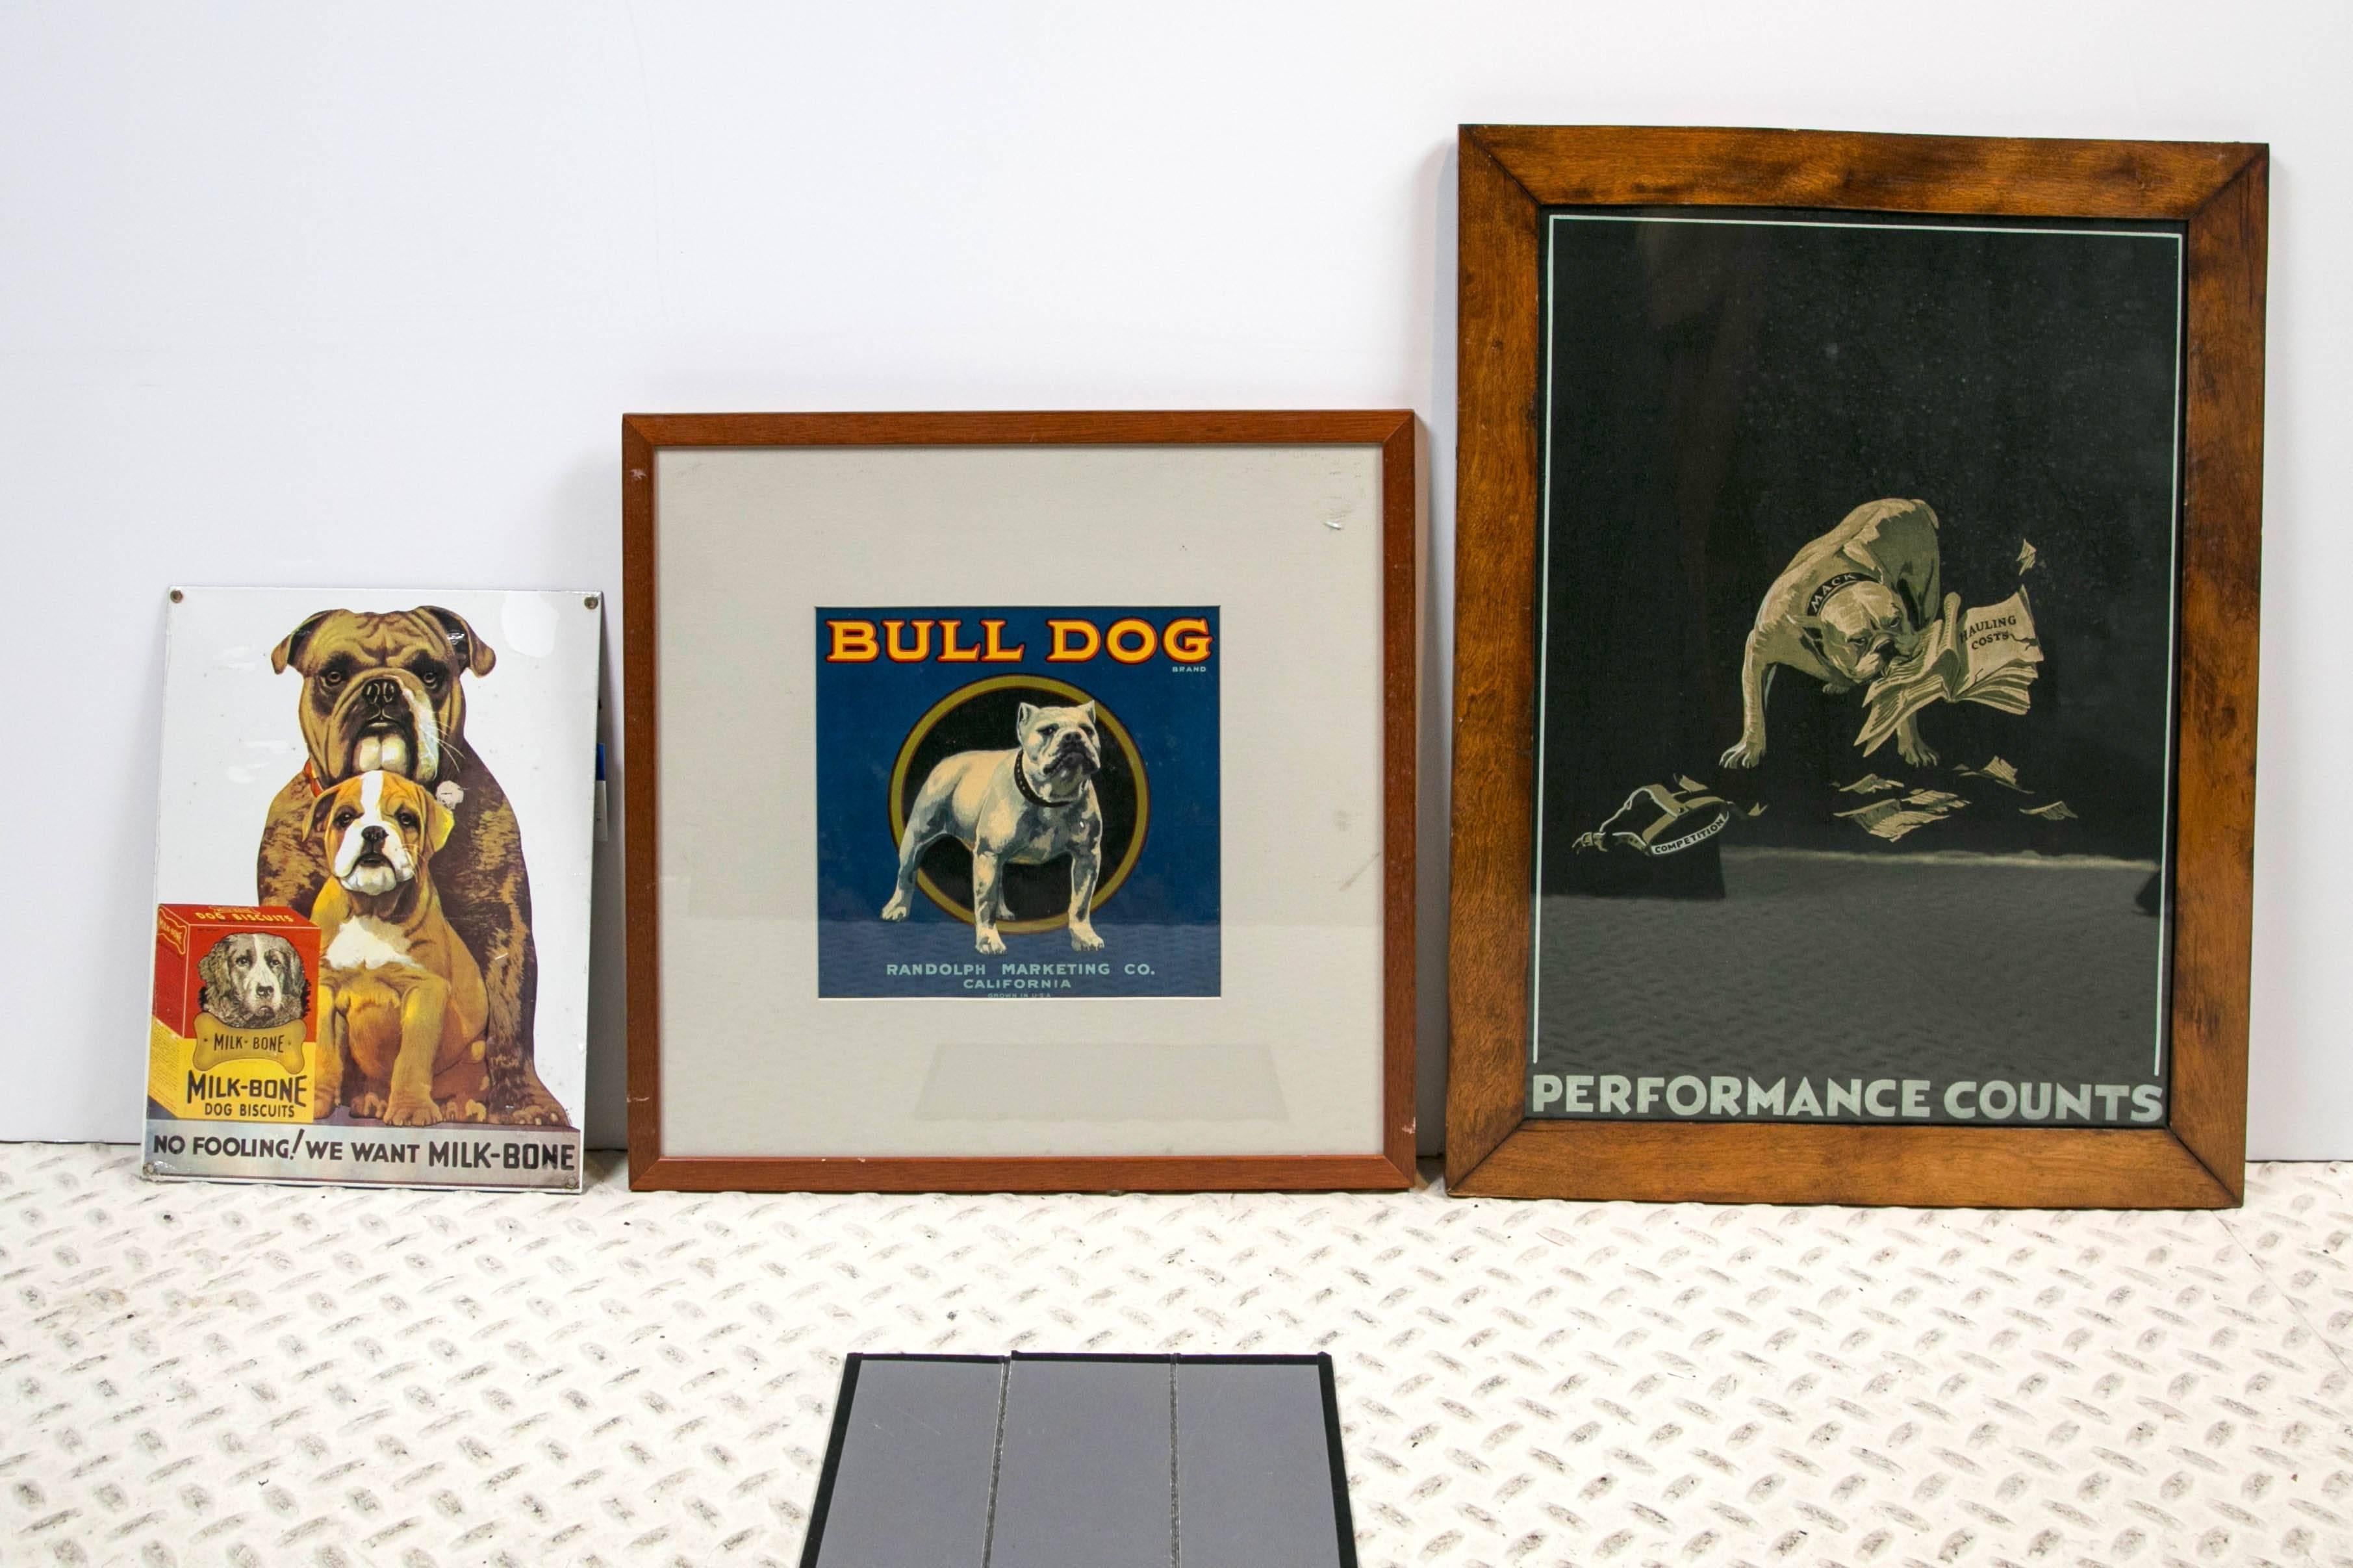 This unique collection of ads and a plaque. An essential additions to any collection, the celebration of bulldogs in modern history. A vintage Milkbone ad and an engraved plaque with a Pope quote is not framed. The vintage posters are framed behind